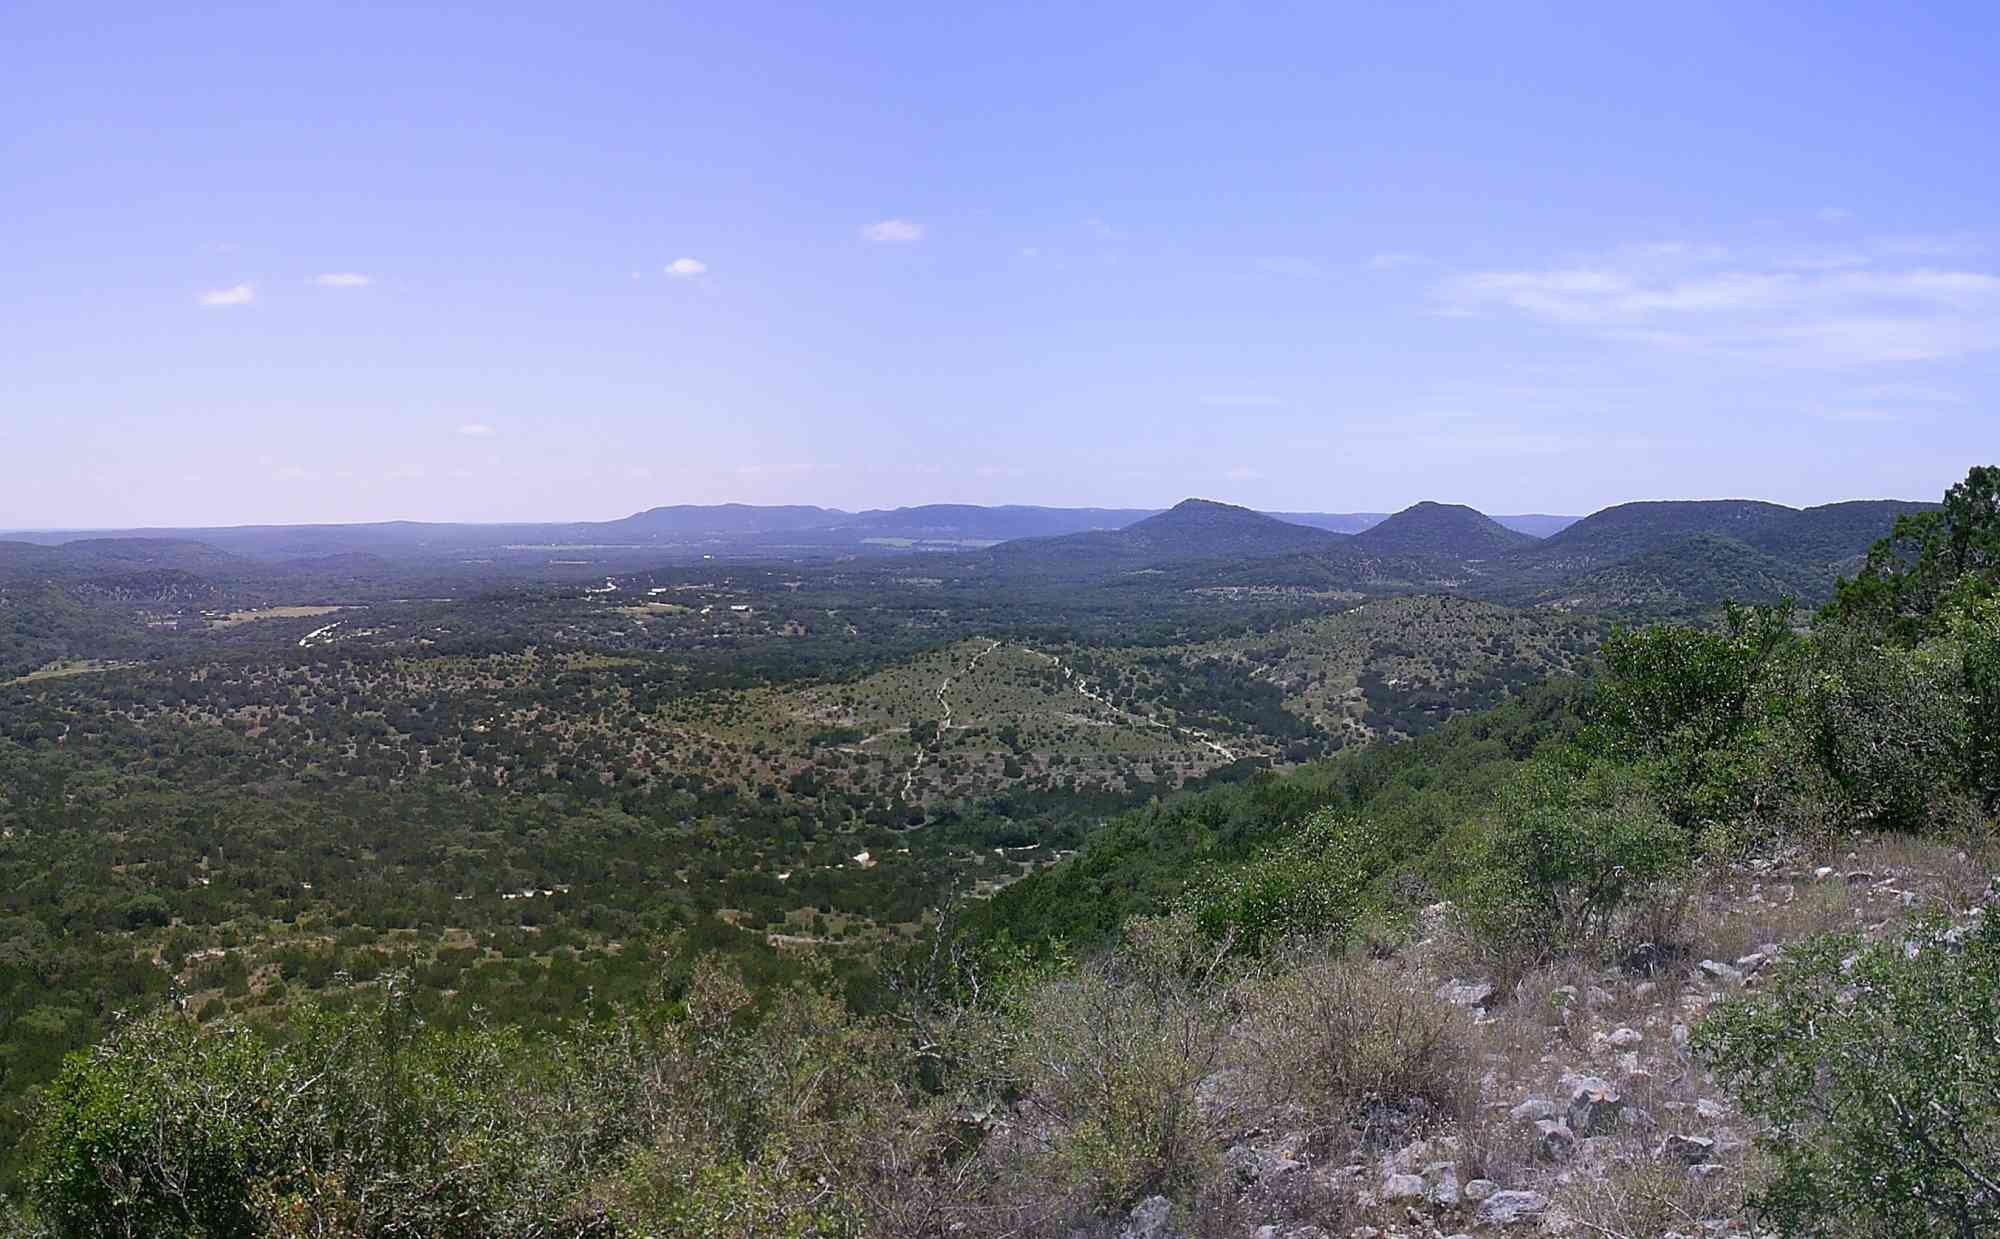 Hill Country State Natural Area in Bandera County